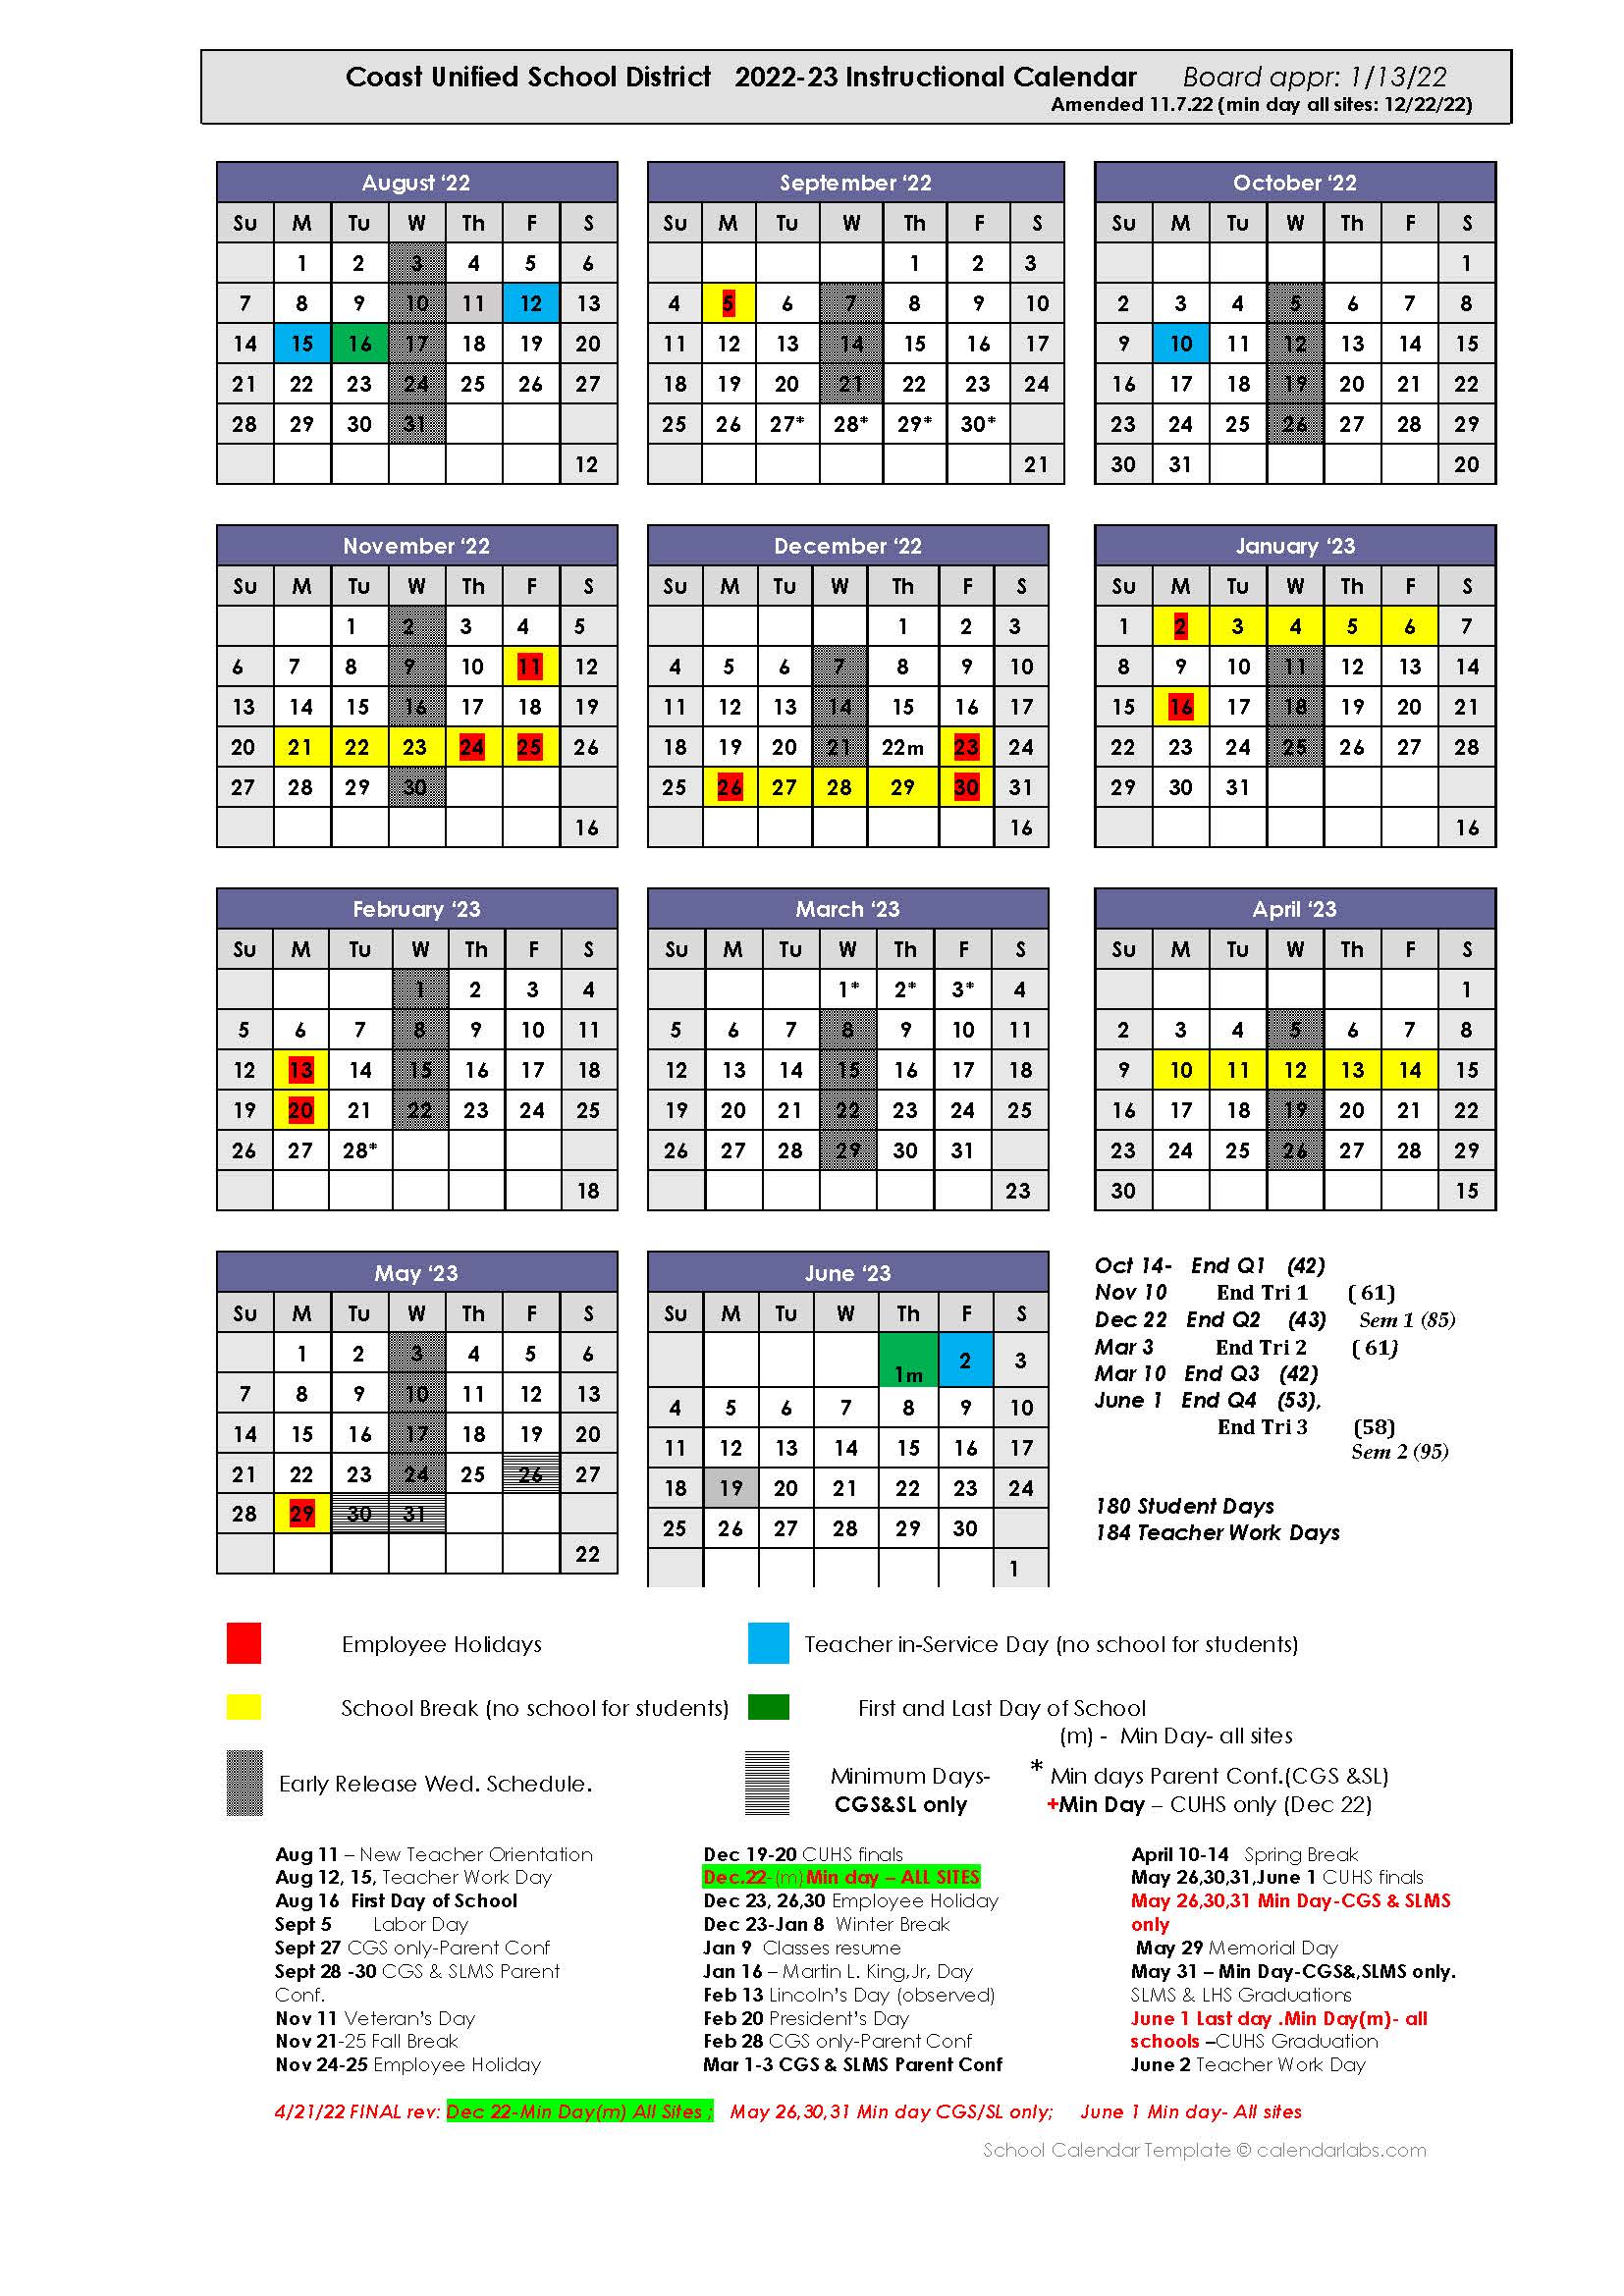 Coast Unified School District Calendar 2022 and 2023